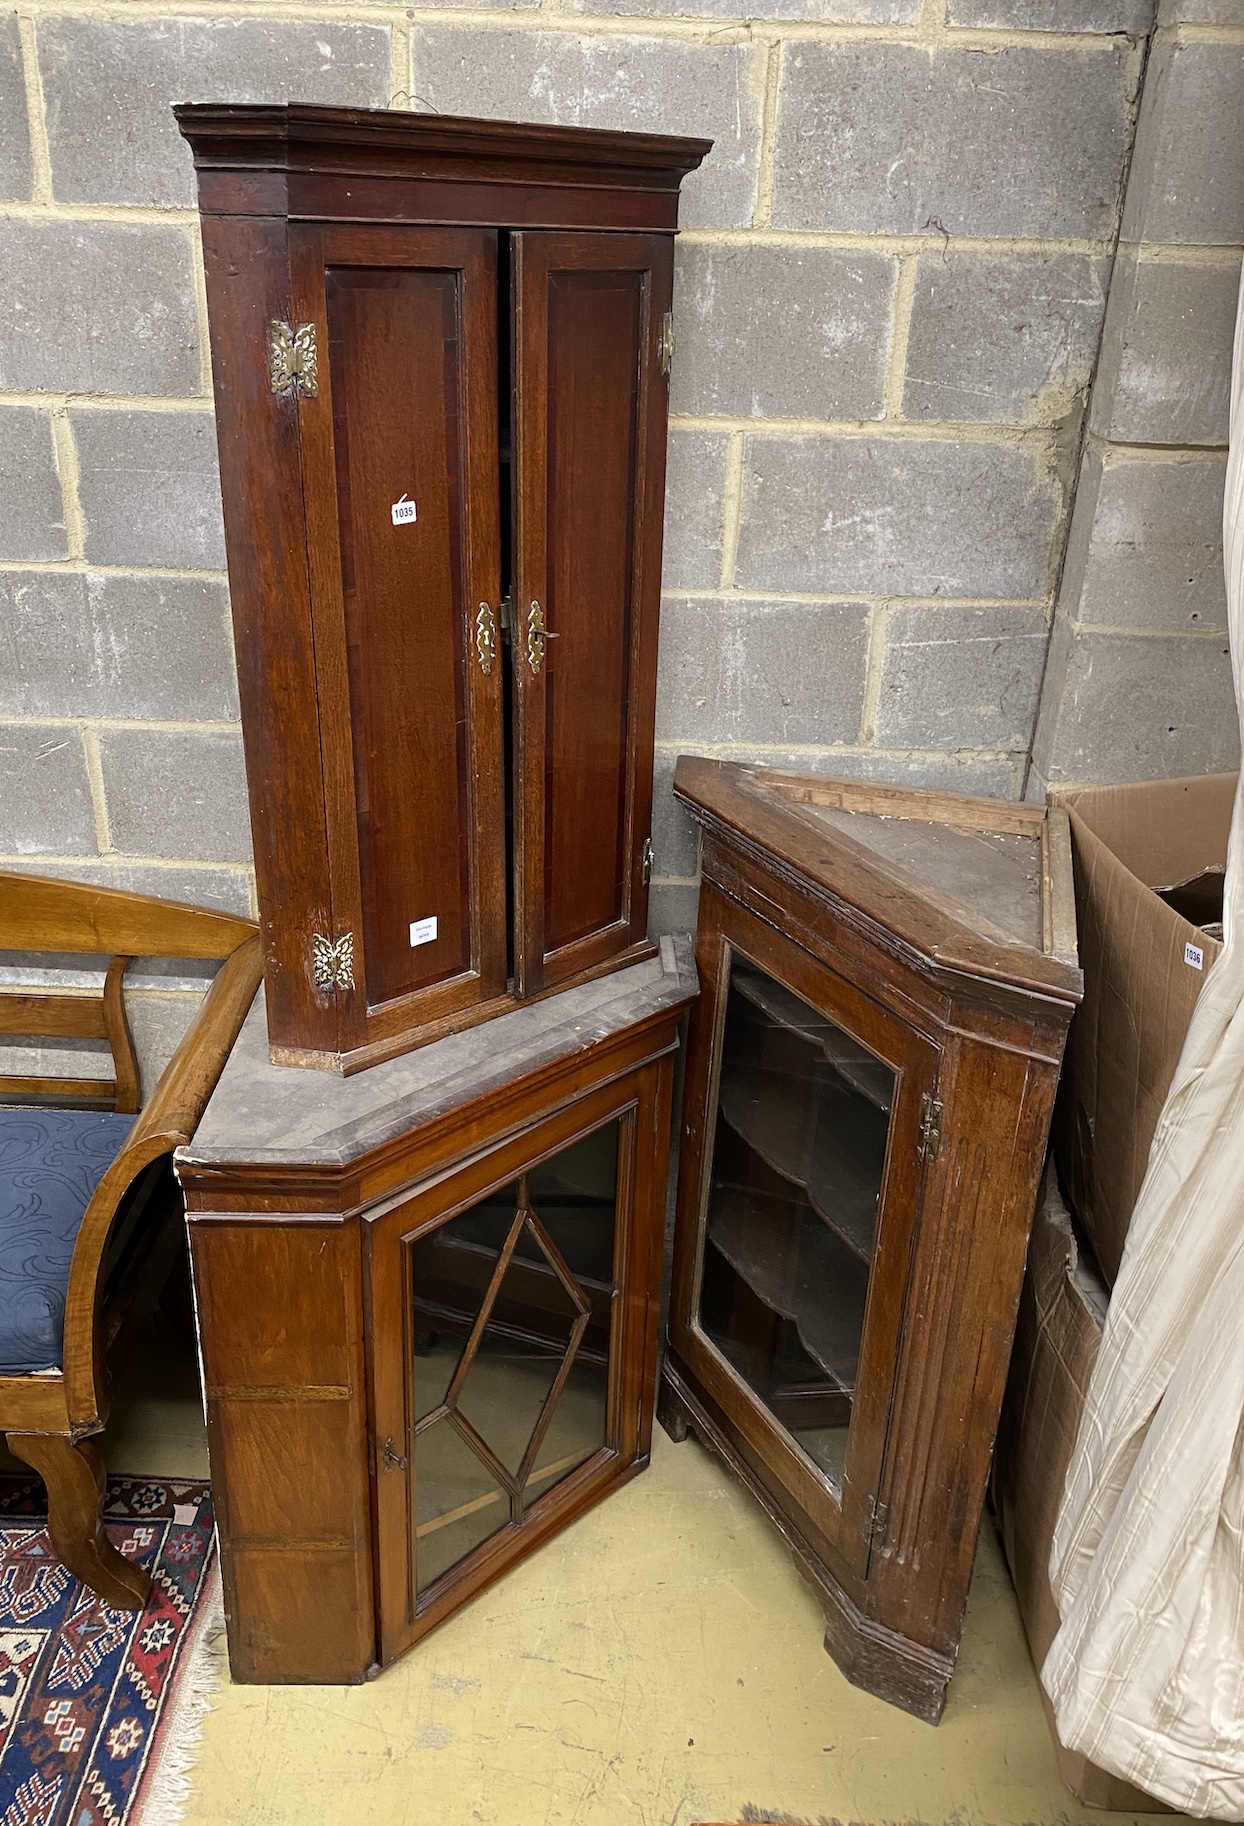 Three George III and later oak and mahogany hanging corner cupboards, largest 80cm, depth 44cm, height 114cm